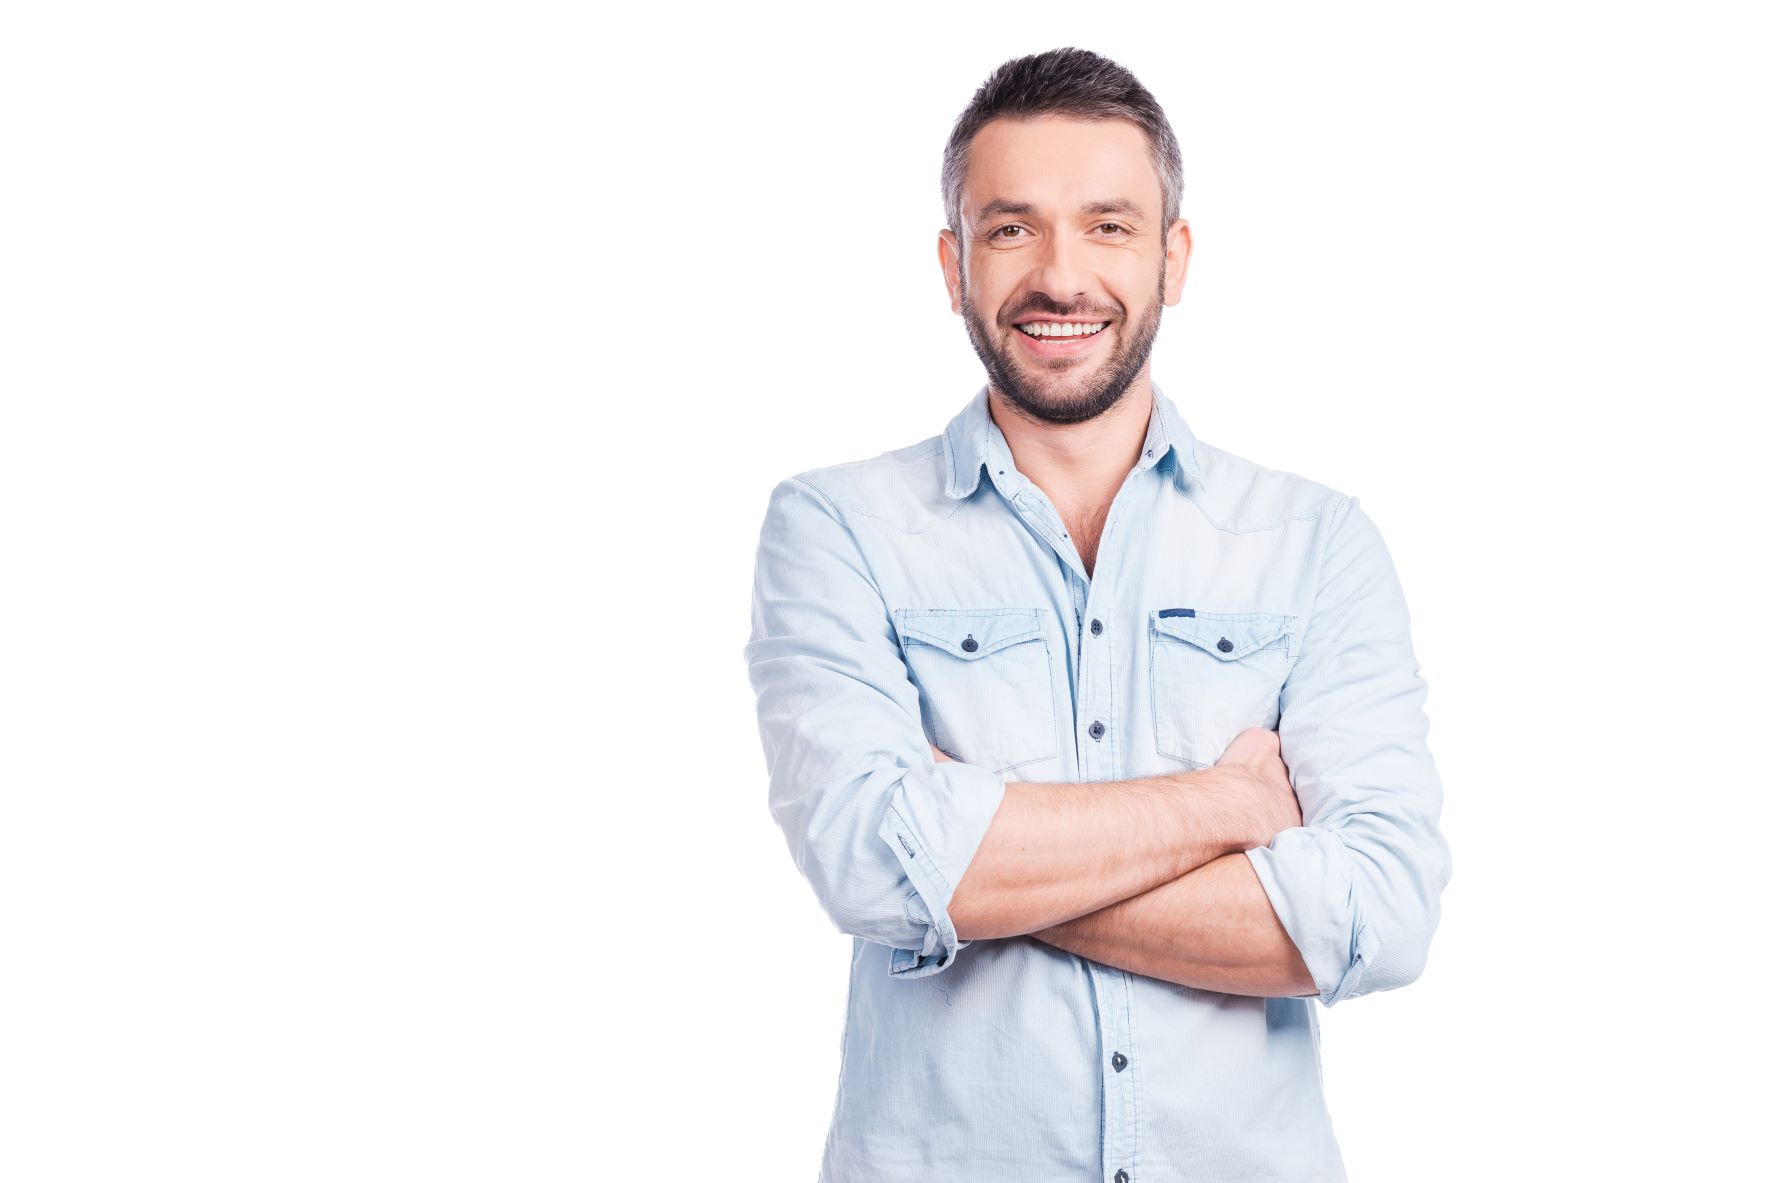 Smiling man standing in front of white background arms crossed